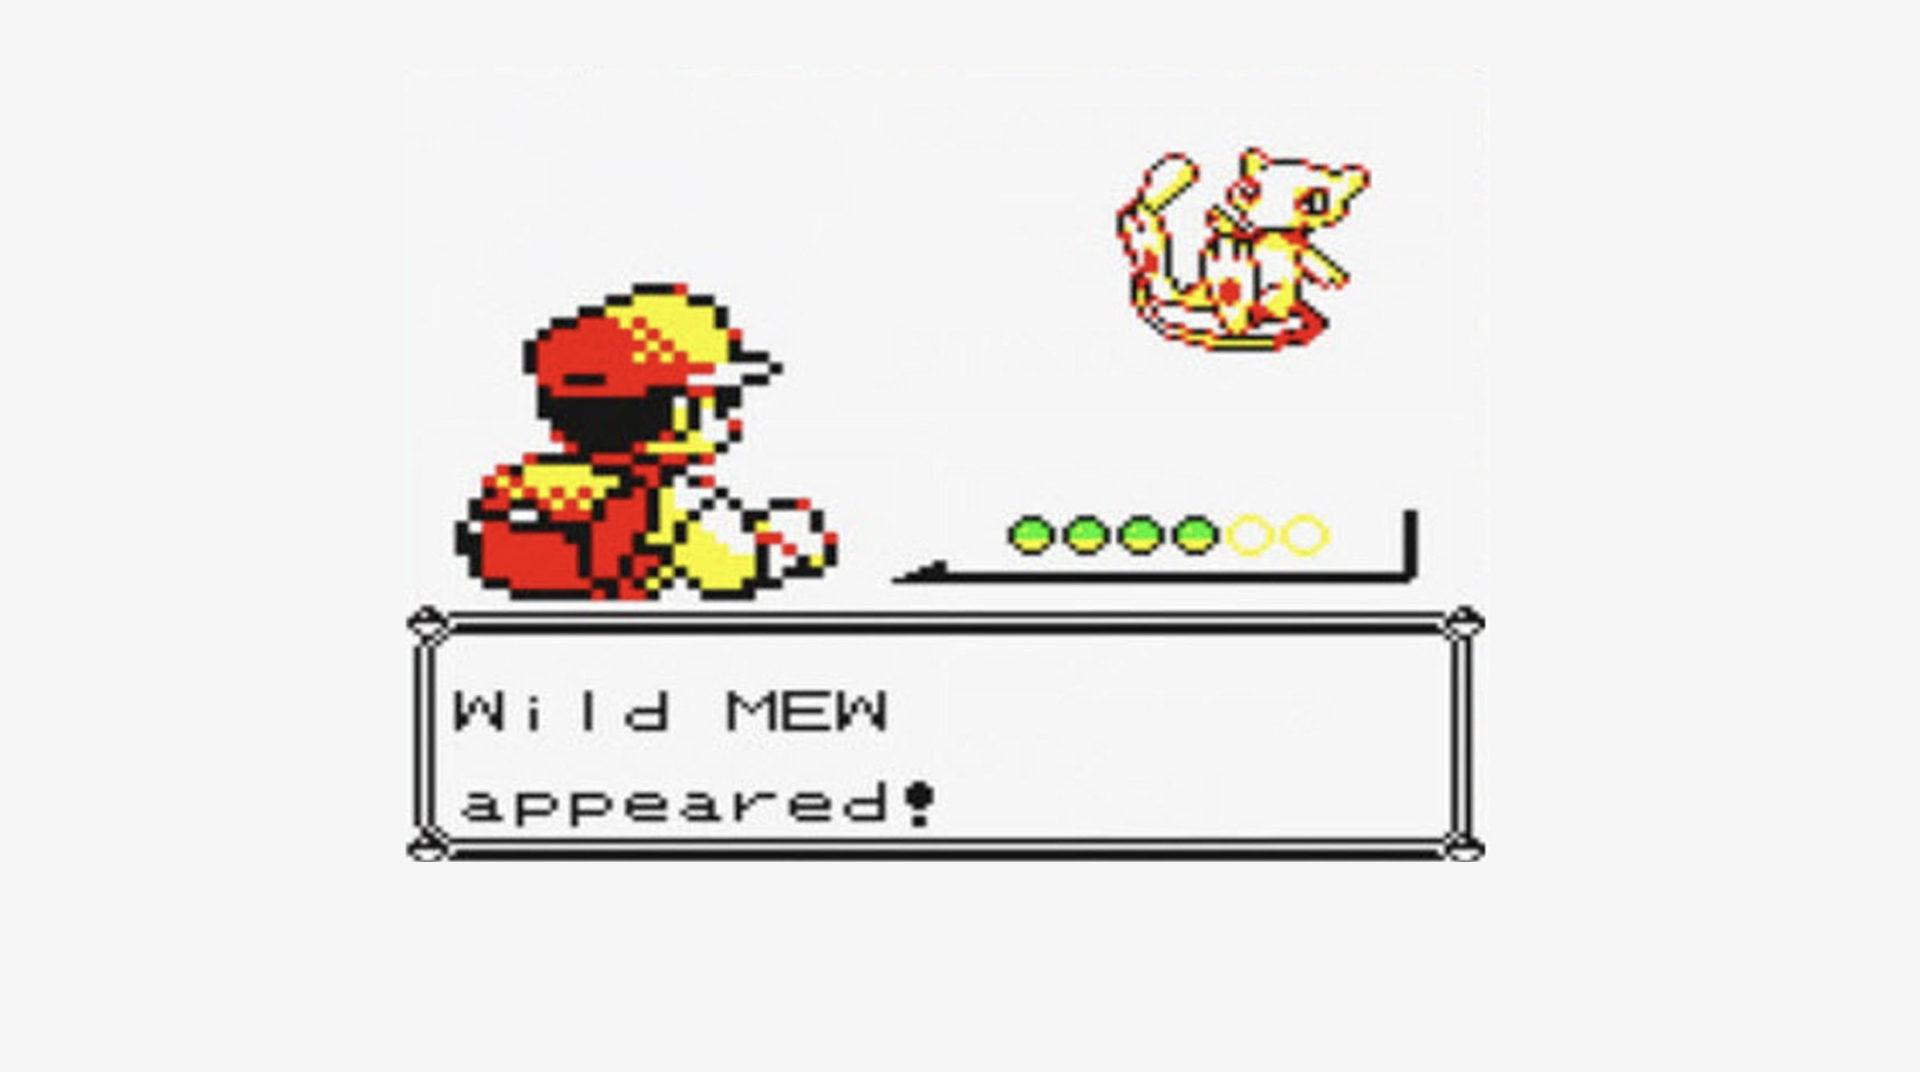 The best moveset for Mewtwo in Pokemon Red and Blue